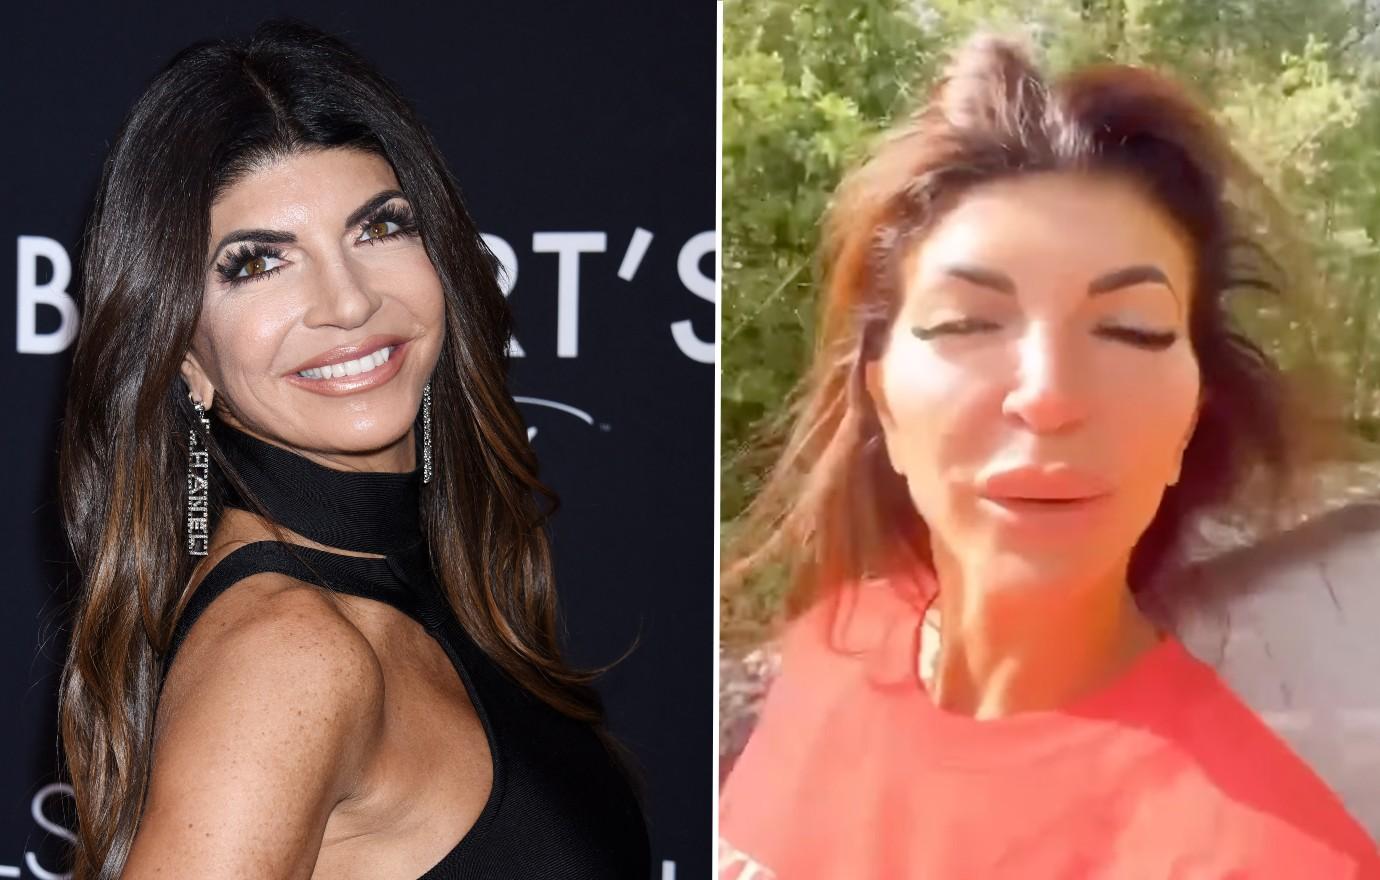 Teresa Giudice Looks Unrecognizable as Doctors Reveal What Plastic Surgery Caused Shocking New Look